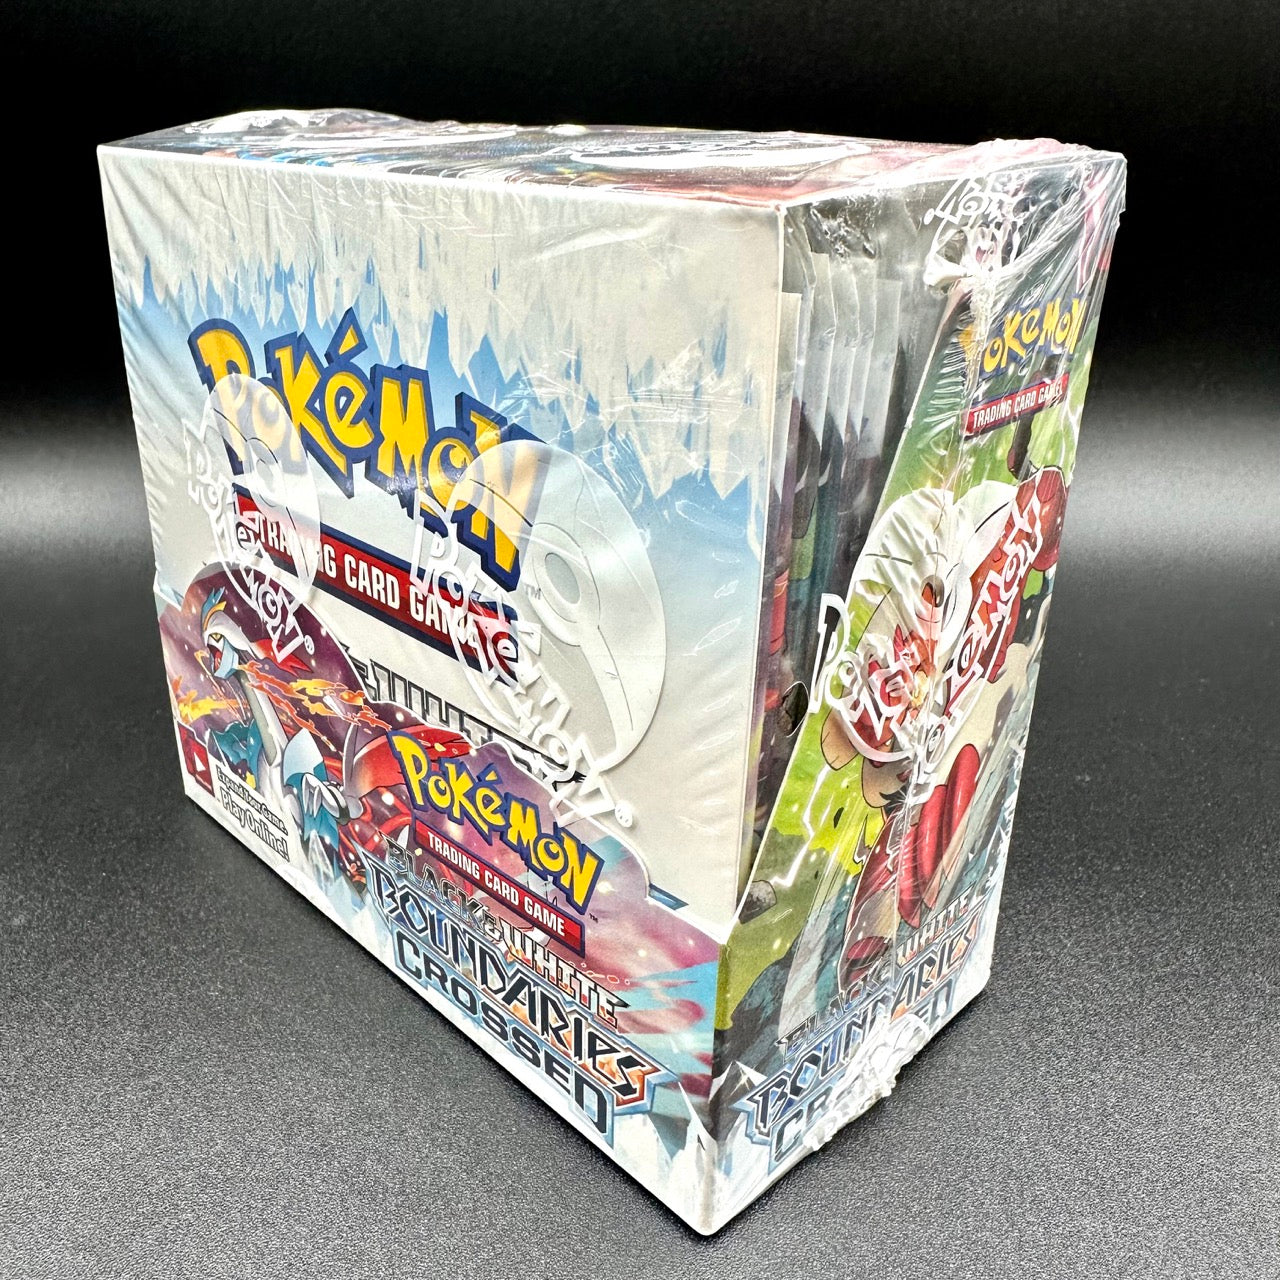 
                  
                    Image of a Pokémon Black and White Boundaries Crossed Booster Box, featuring 36 packs of 10 cards from the Boundaries Crossed expansion. Ideal for collectors and Pokémon players.
                  
                